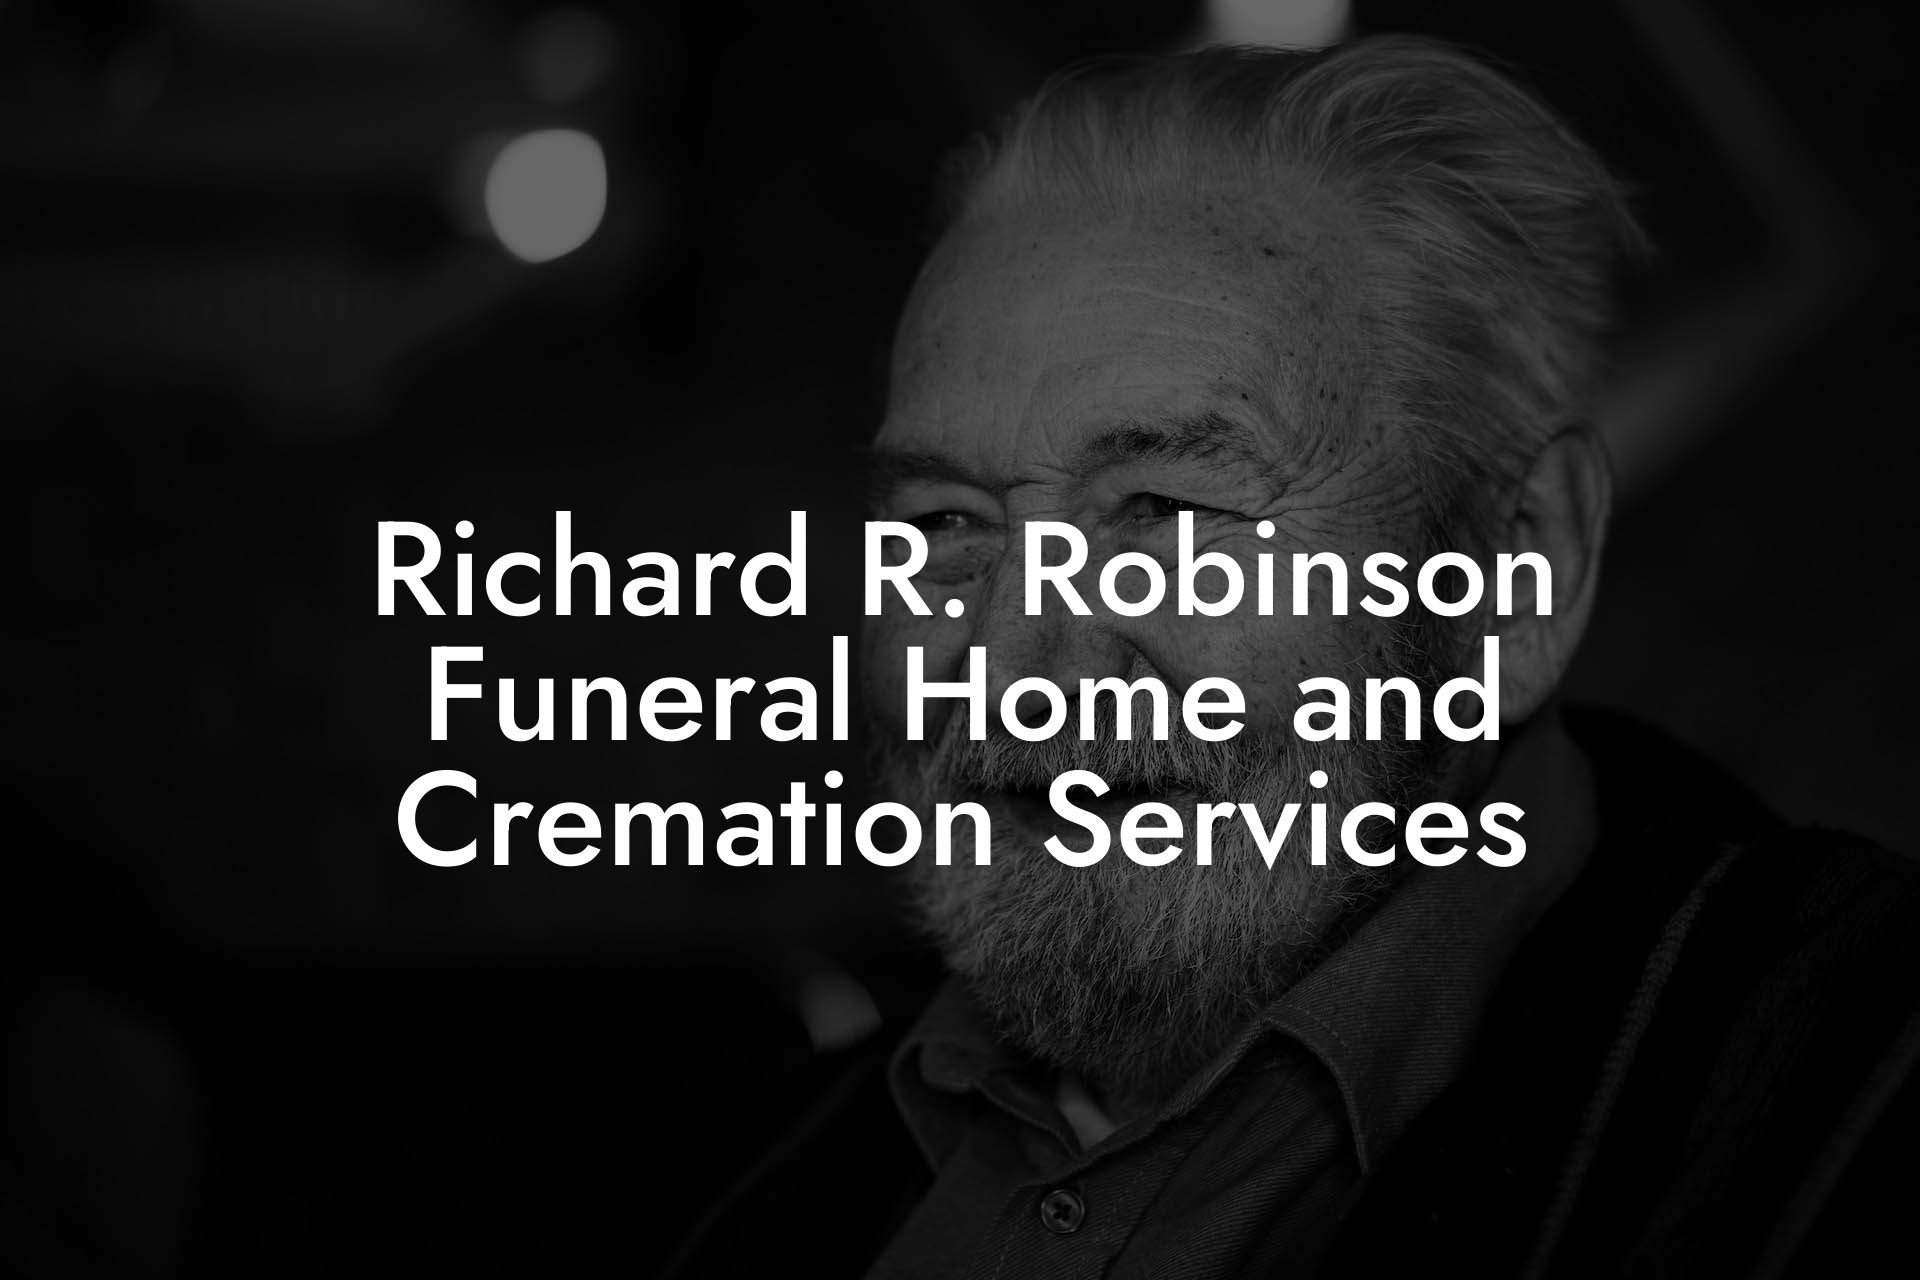 Richard R. Robinson Funeral Home and Cremation Services